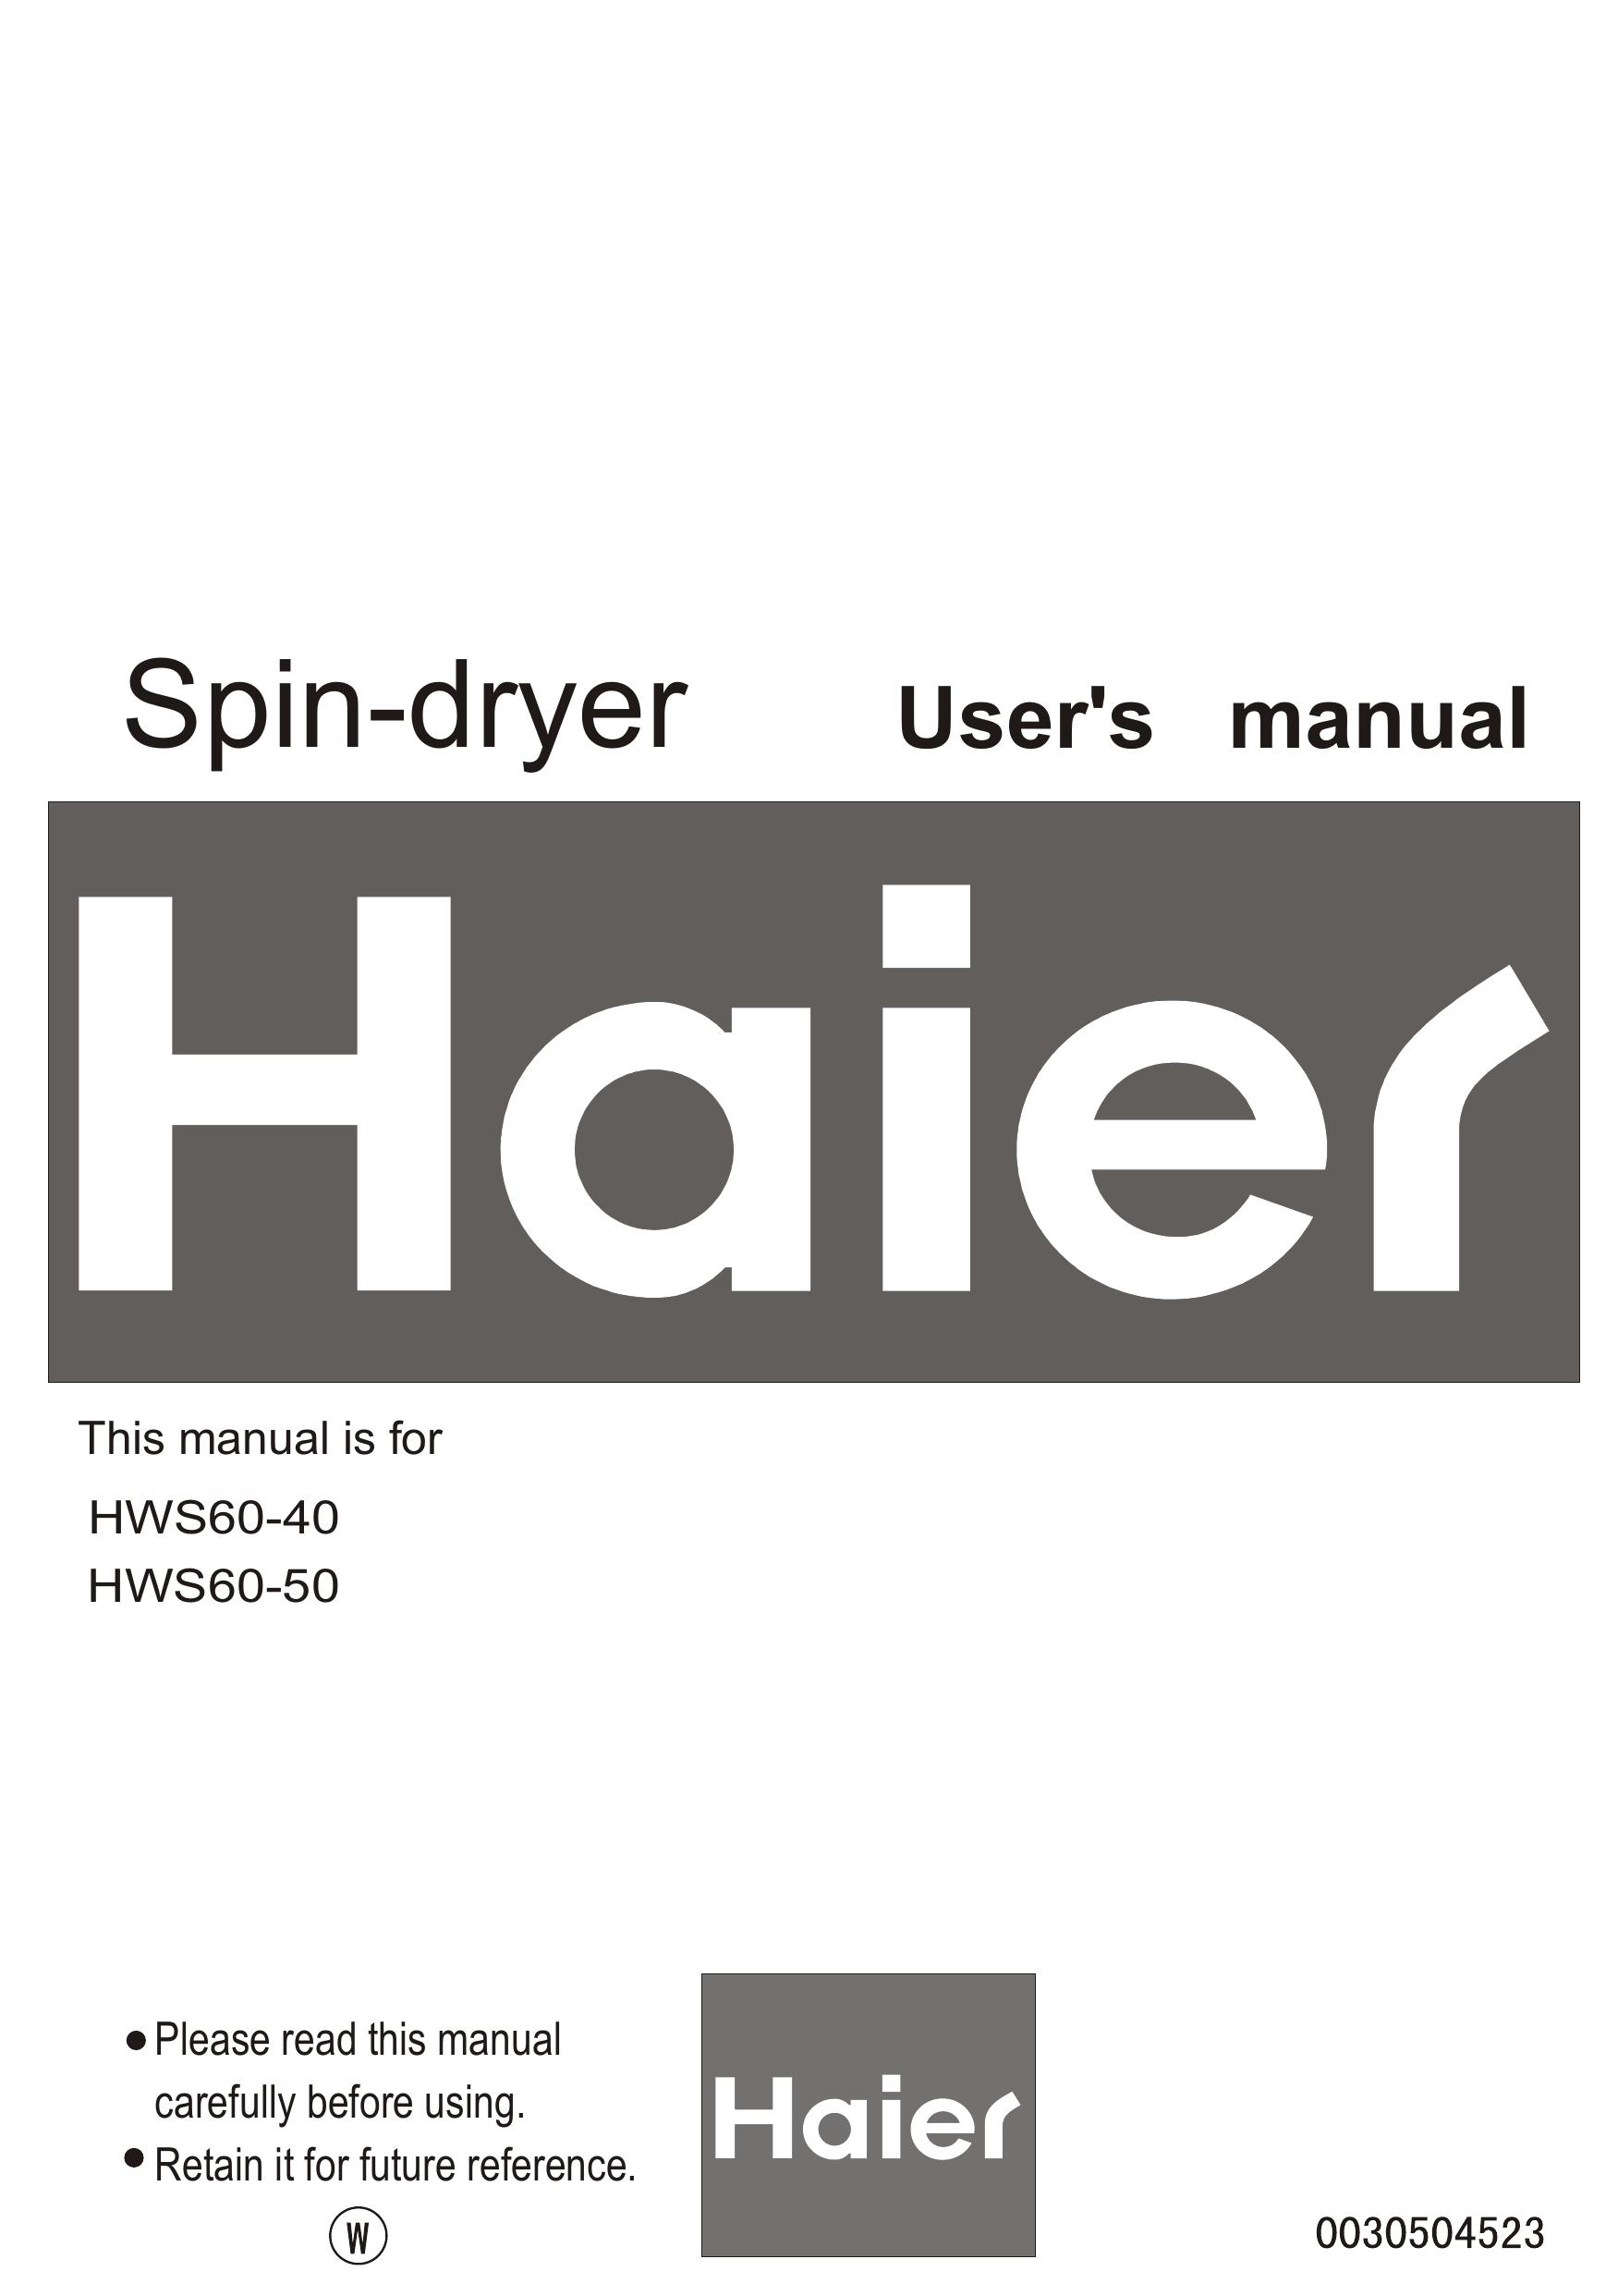 Haier HWS60-50 Clothes Dryer User Manual